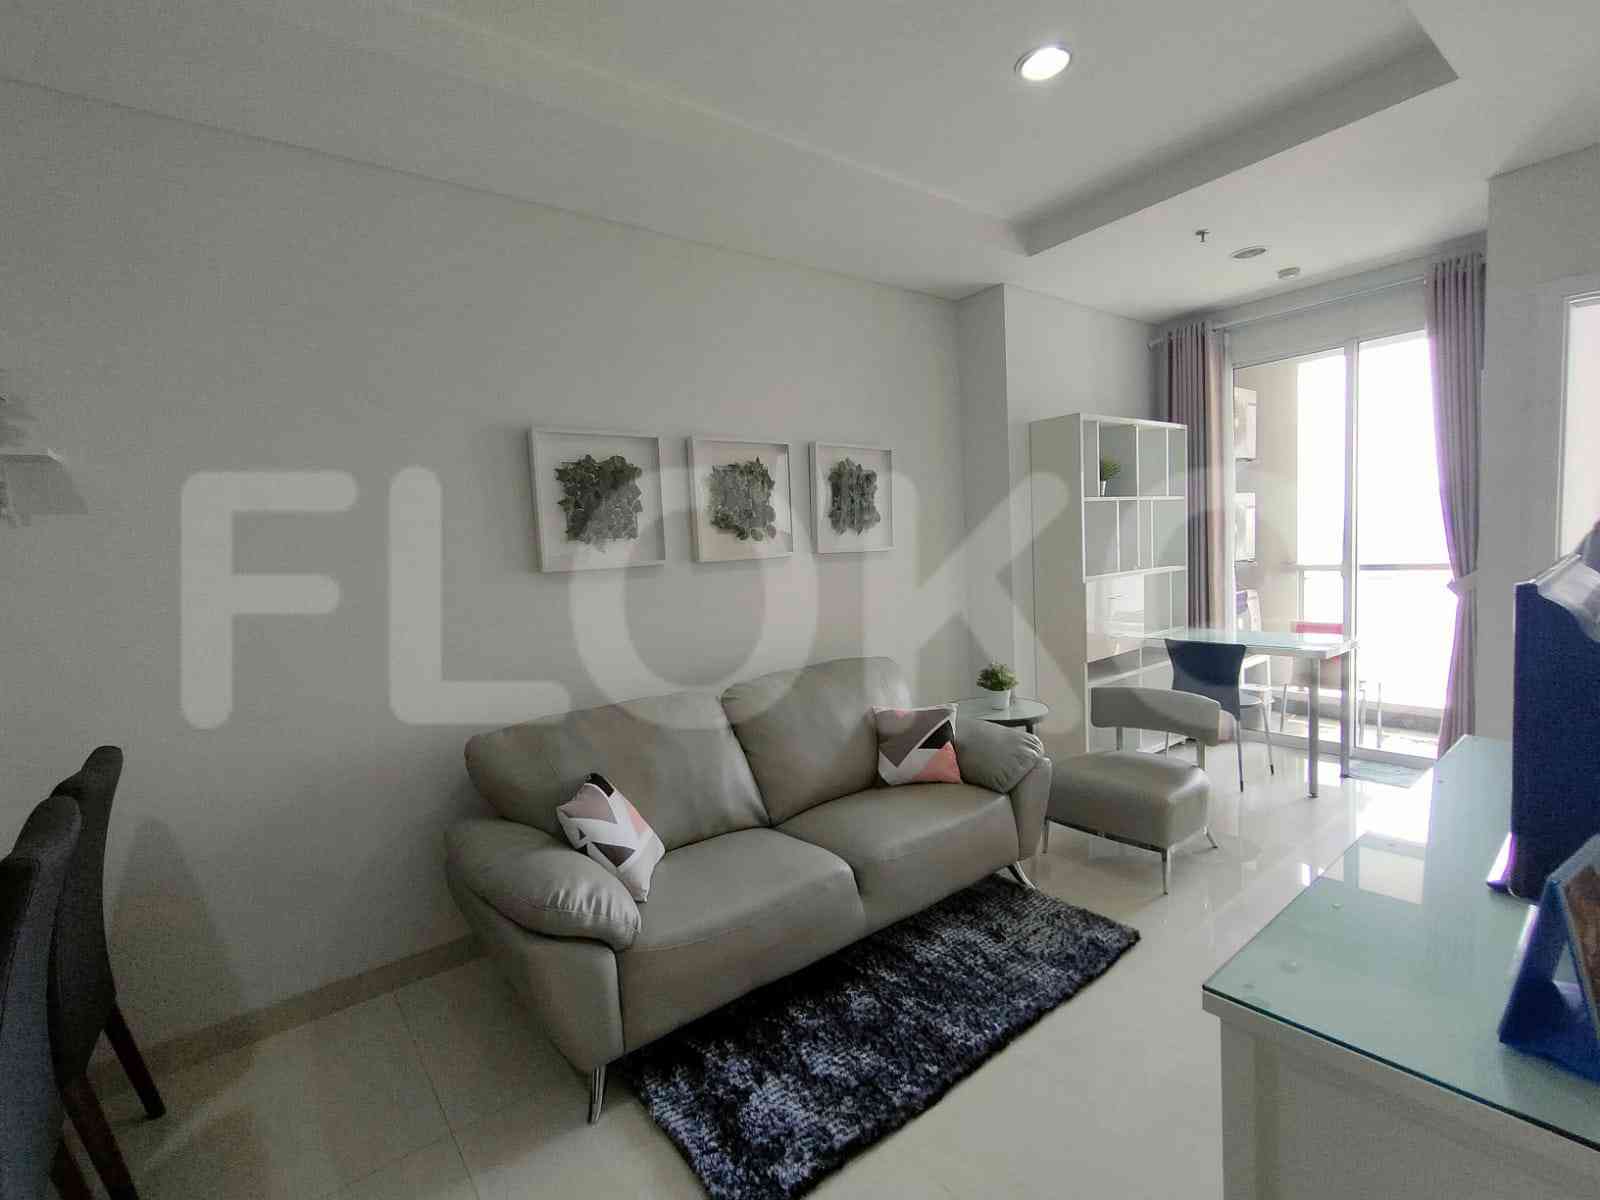 3 Bedroom on 9th Floor for Rent in Grand Mansion Apartment - ftaecc 1